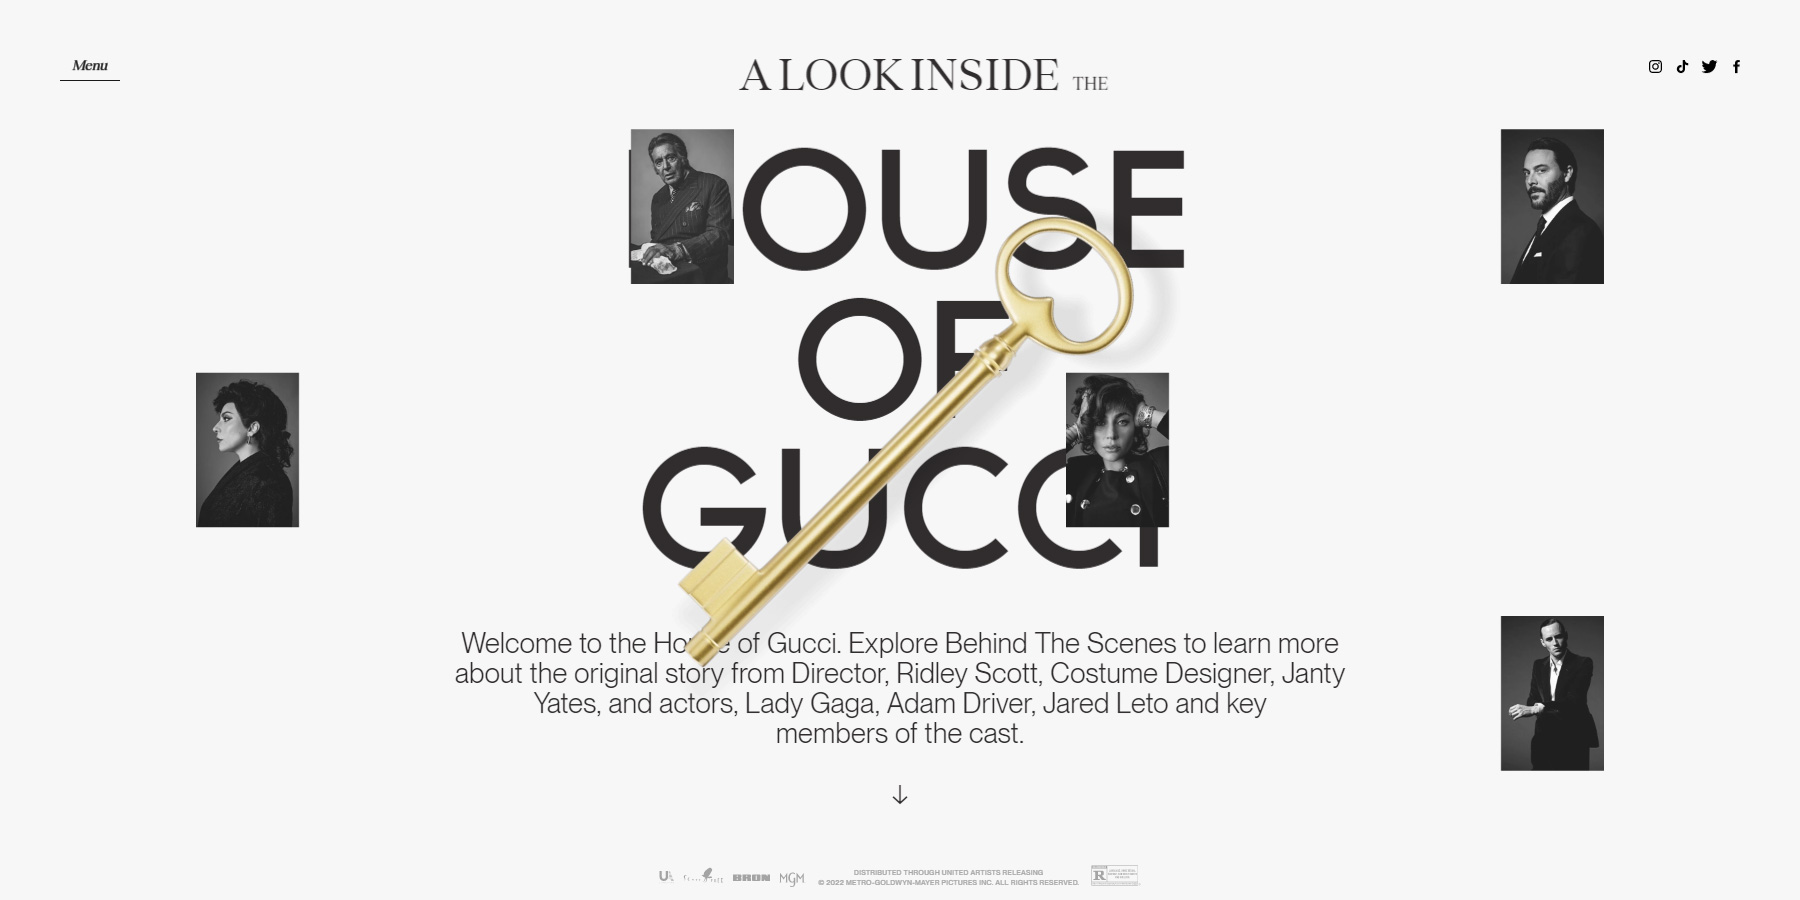 Welcome to the House of Gucci - Website of the Day